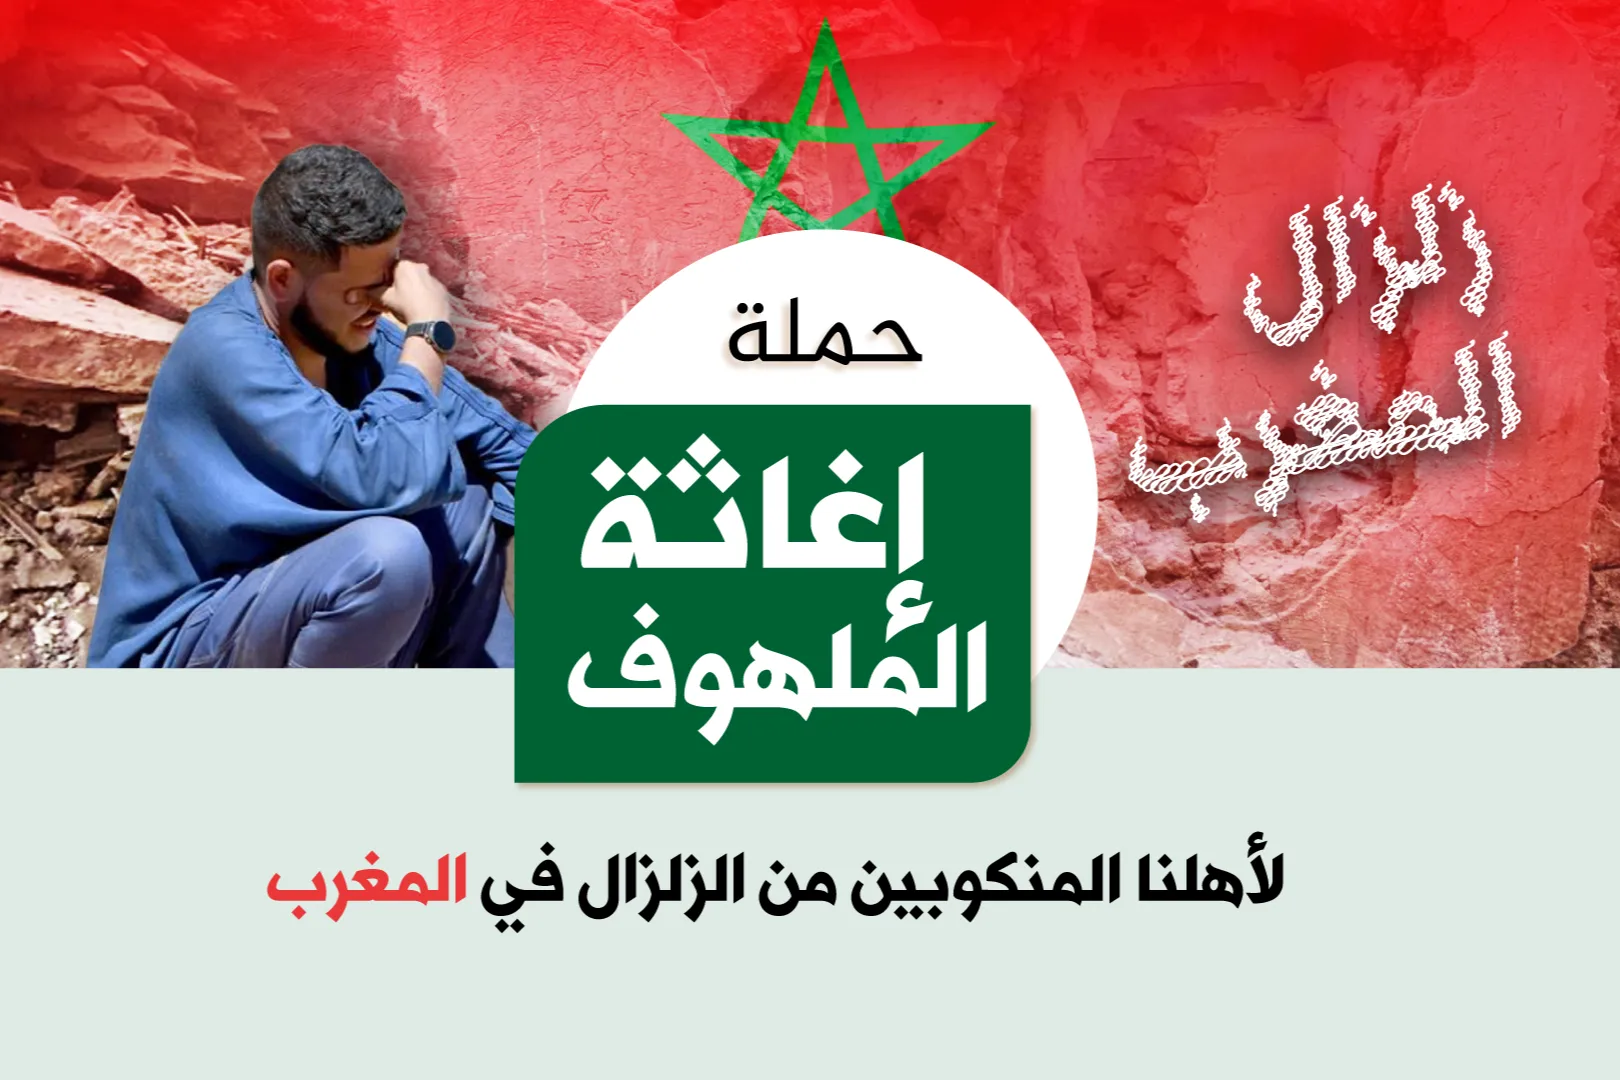 relief the distressed campaign (For our people in Maghreb)